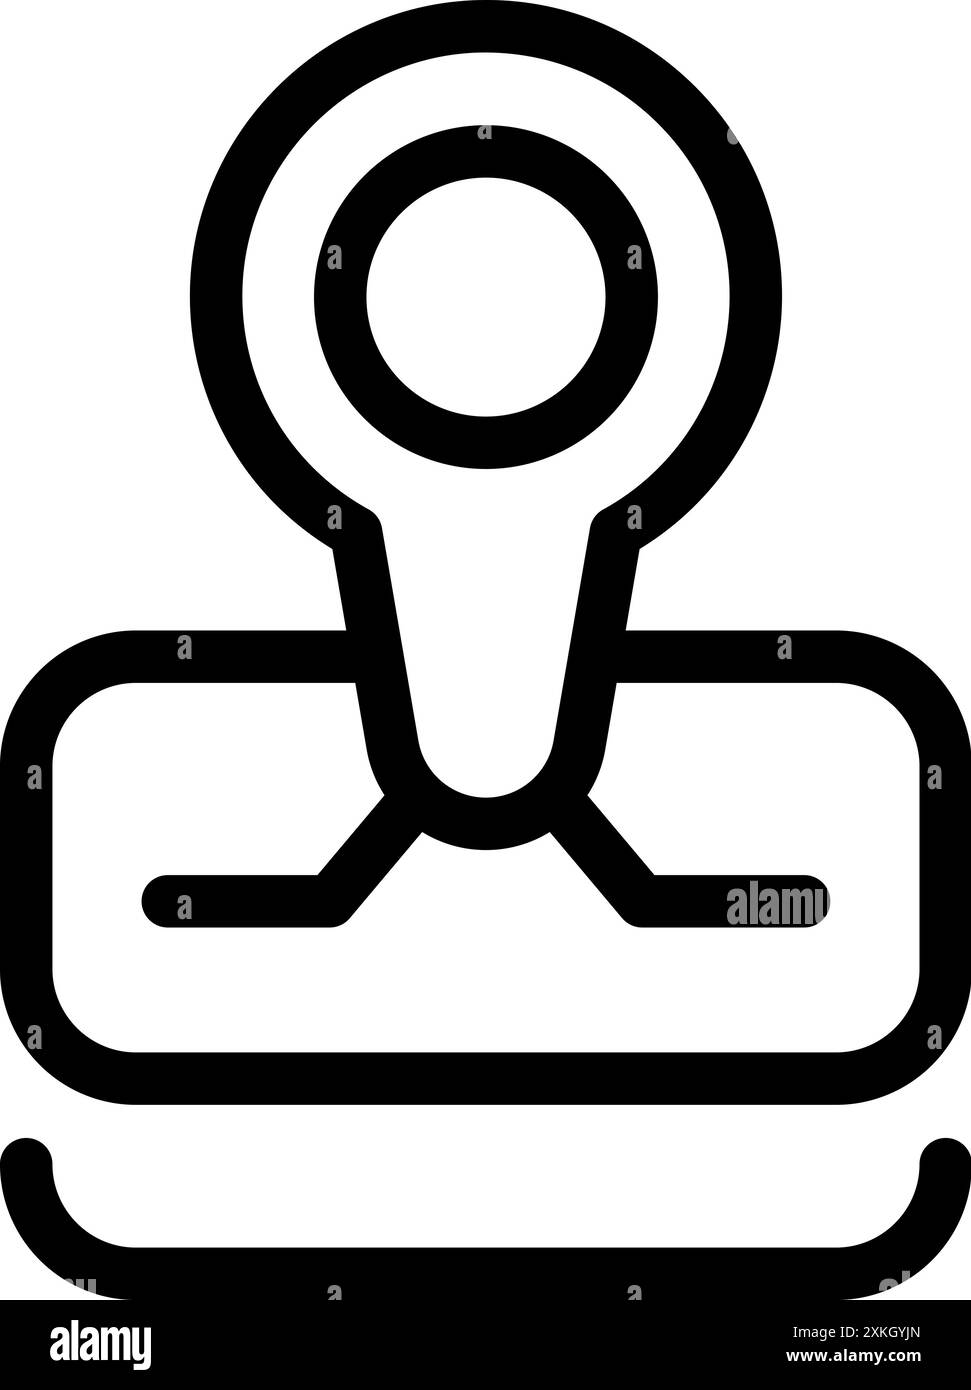 Location pin icon marking a specific point on a stylized map, symbolizing navigation and destination finding Stock Vector